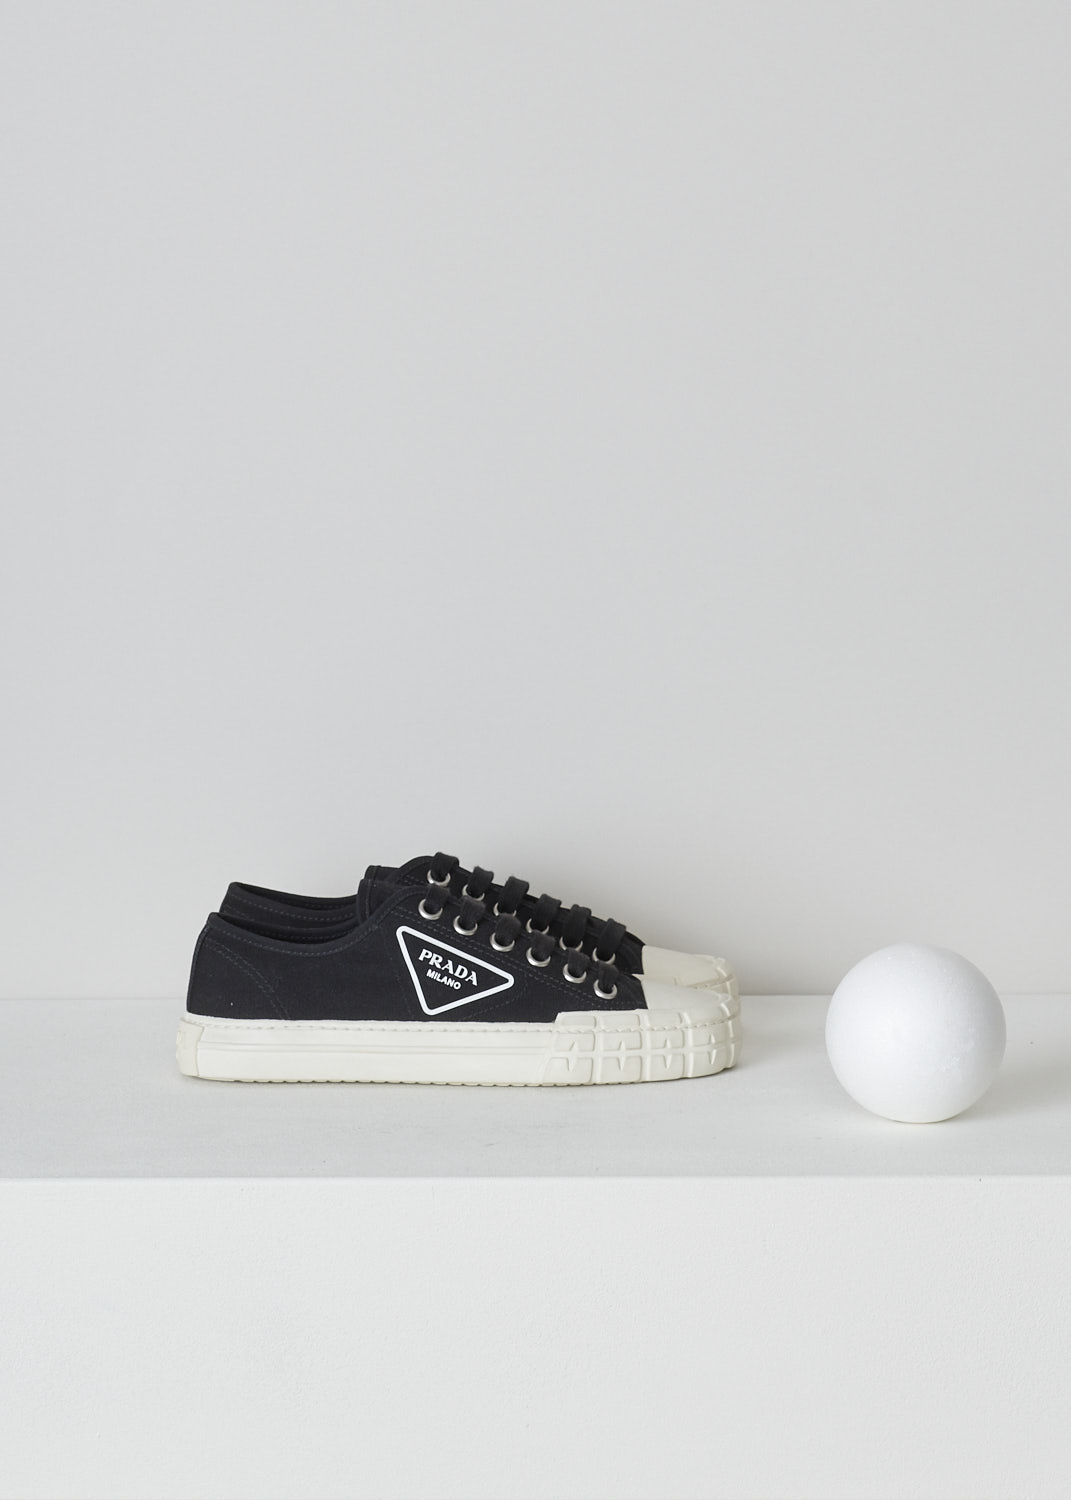 PRADA, LOW TOP BLACK CANVAS SNEAKERS, 1E231M_2OFZ_F057Z_NERO_AVORIO, Black, Side, These low top black canvas sneakers feature a front lace-up fastening with black laces. The brand's triangle logo can be found on the side in white rubber. These sneakers have a round toe with a white rubber toe cap and ribbed rubber soles.
